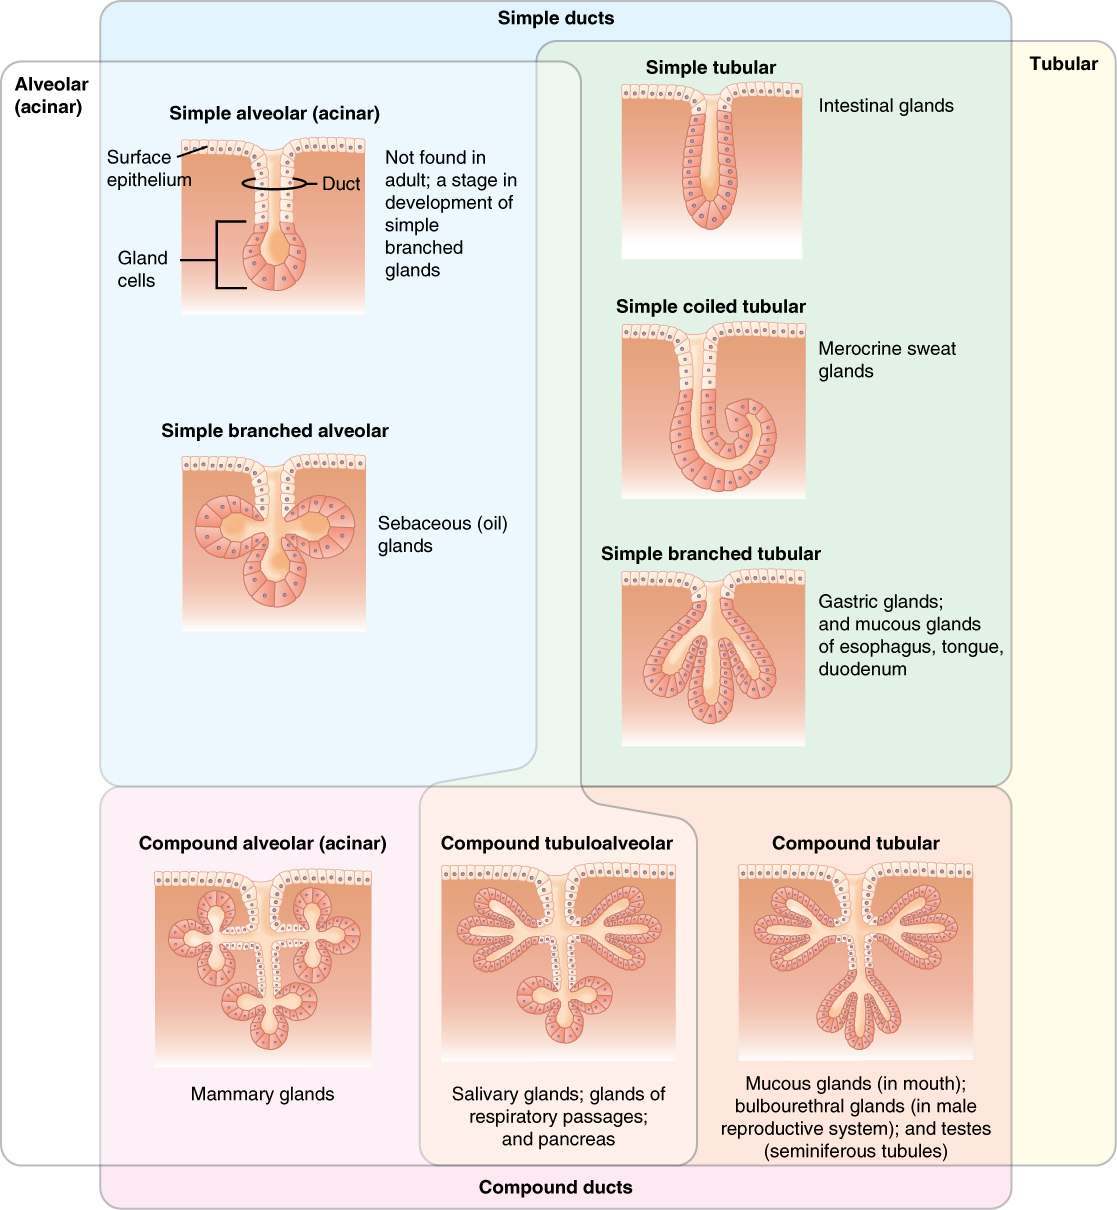 This table shows the different types of exocrine glands: alveolar